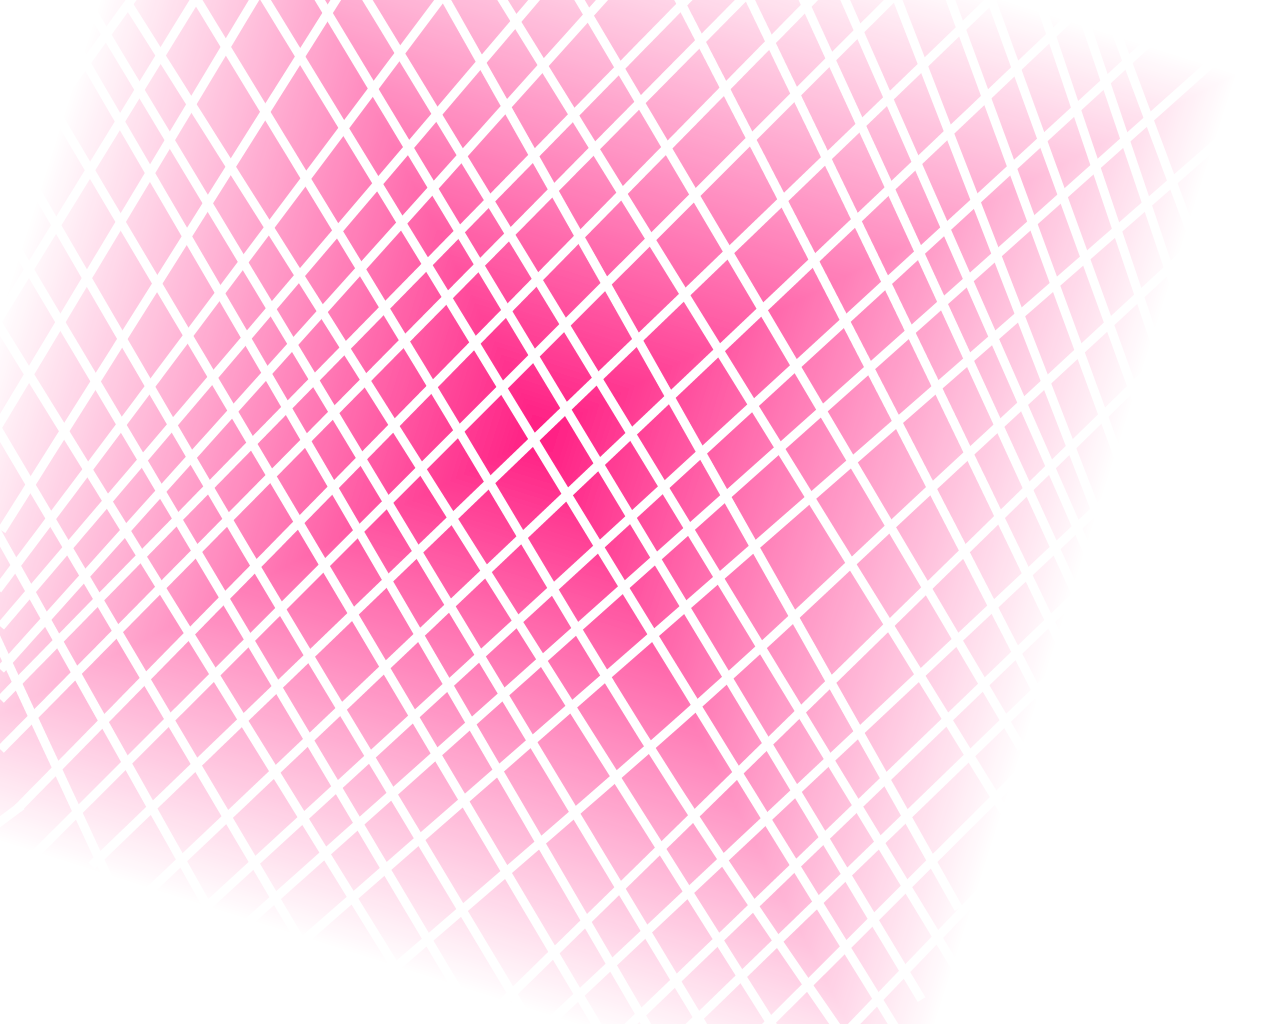 Random pink backgrounds by Audralg